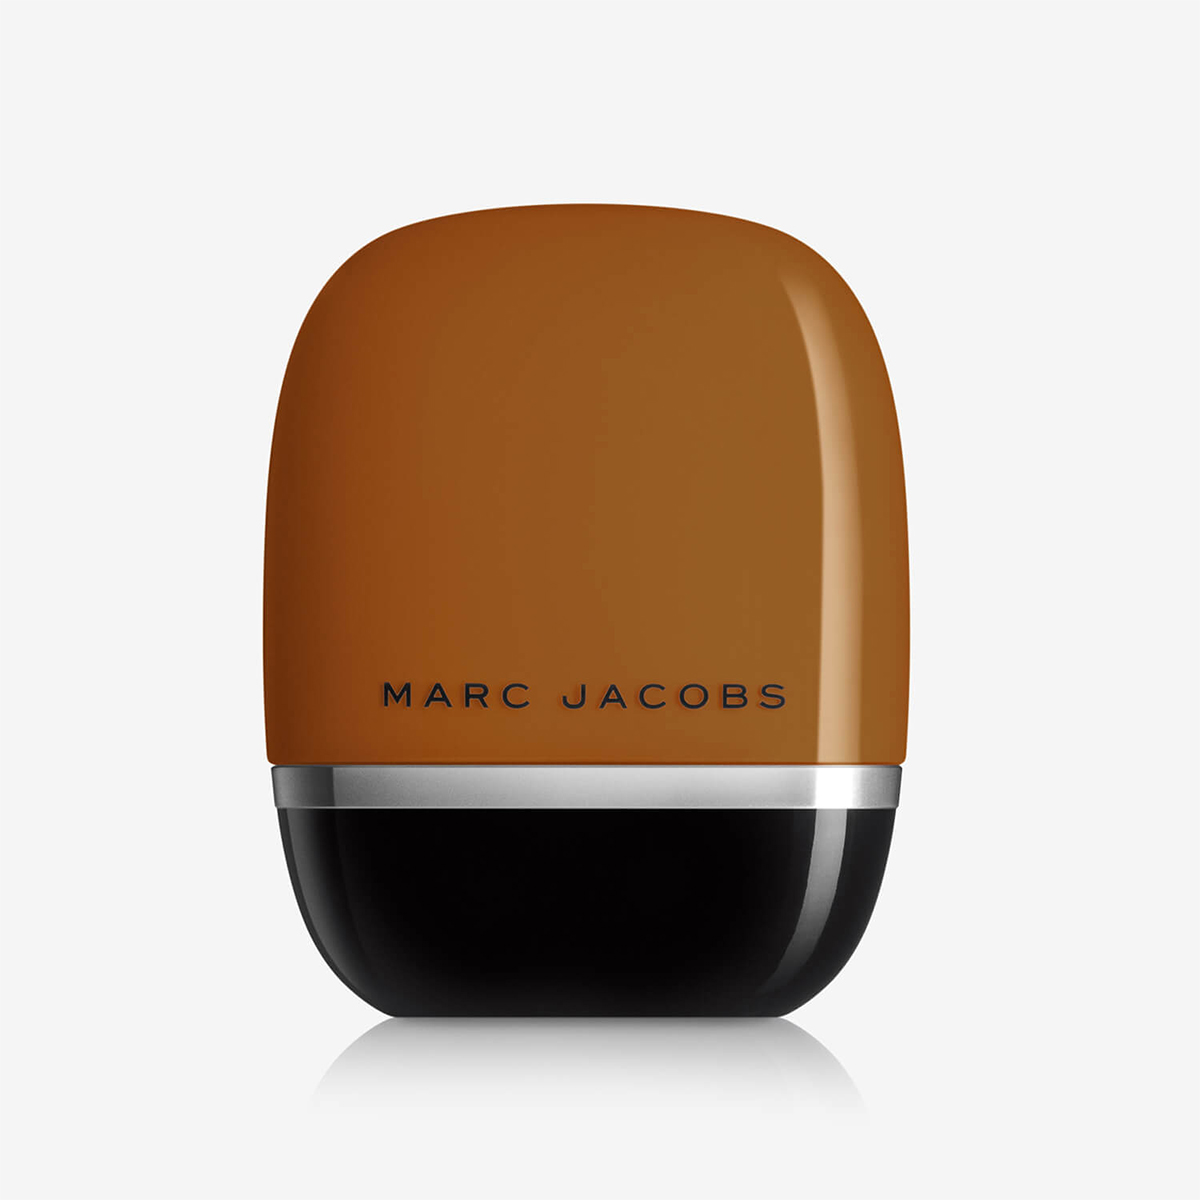 Marc Jacobs Beauty Products